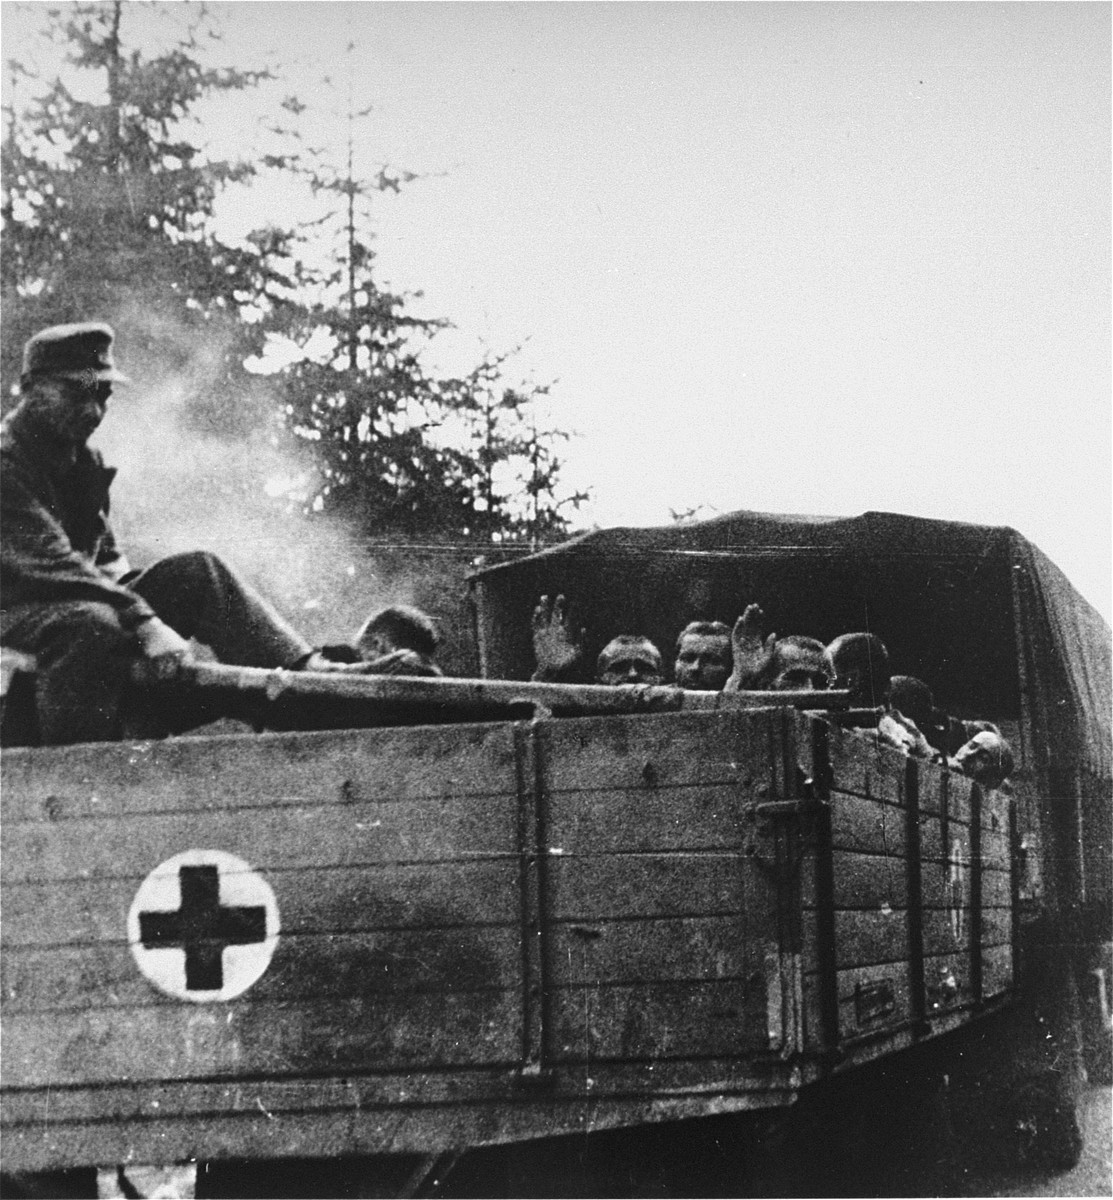 Survivors from Ebensee are evacuated to the 139th Evacuation Hospital for medical treatment.